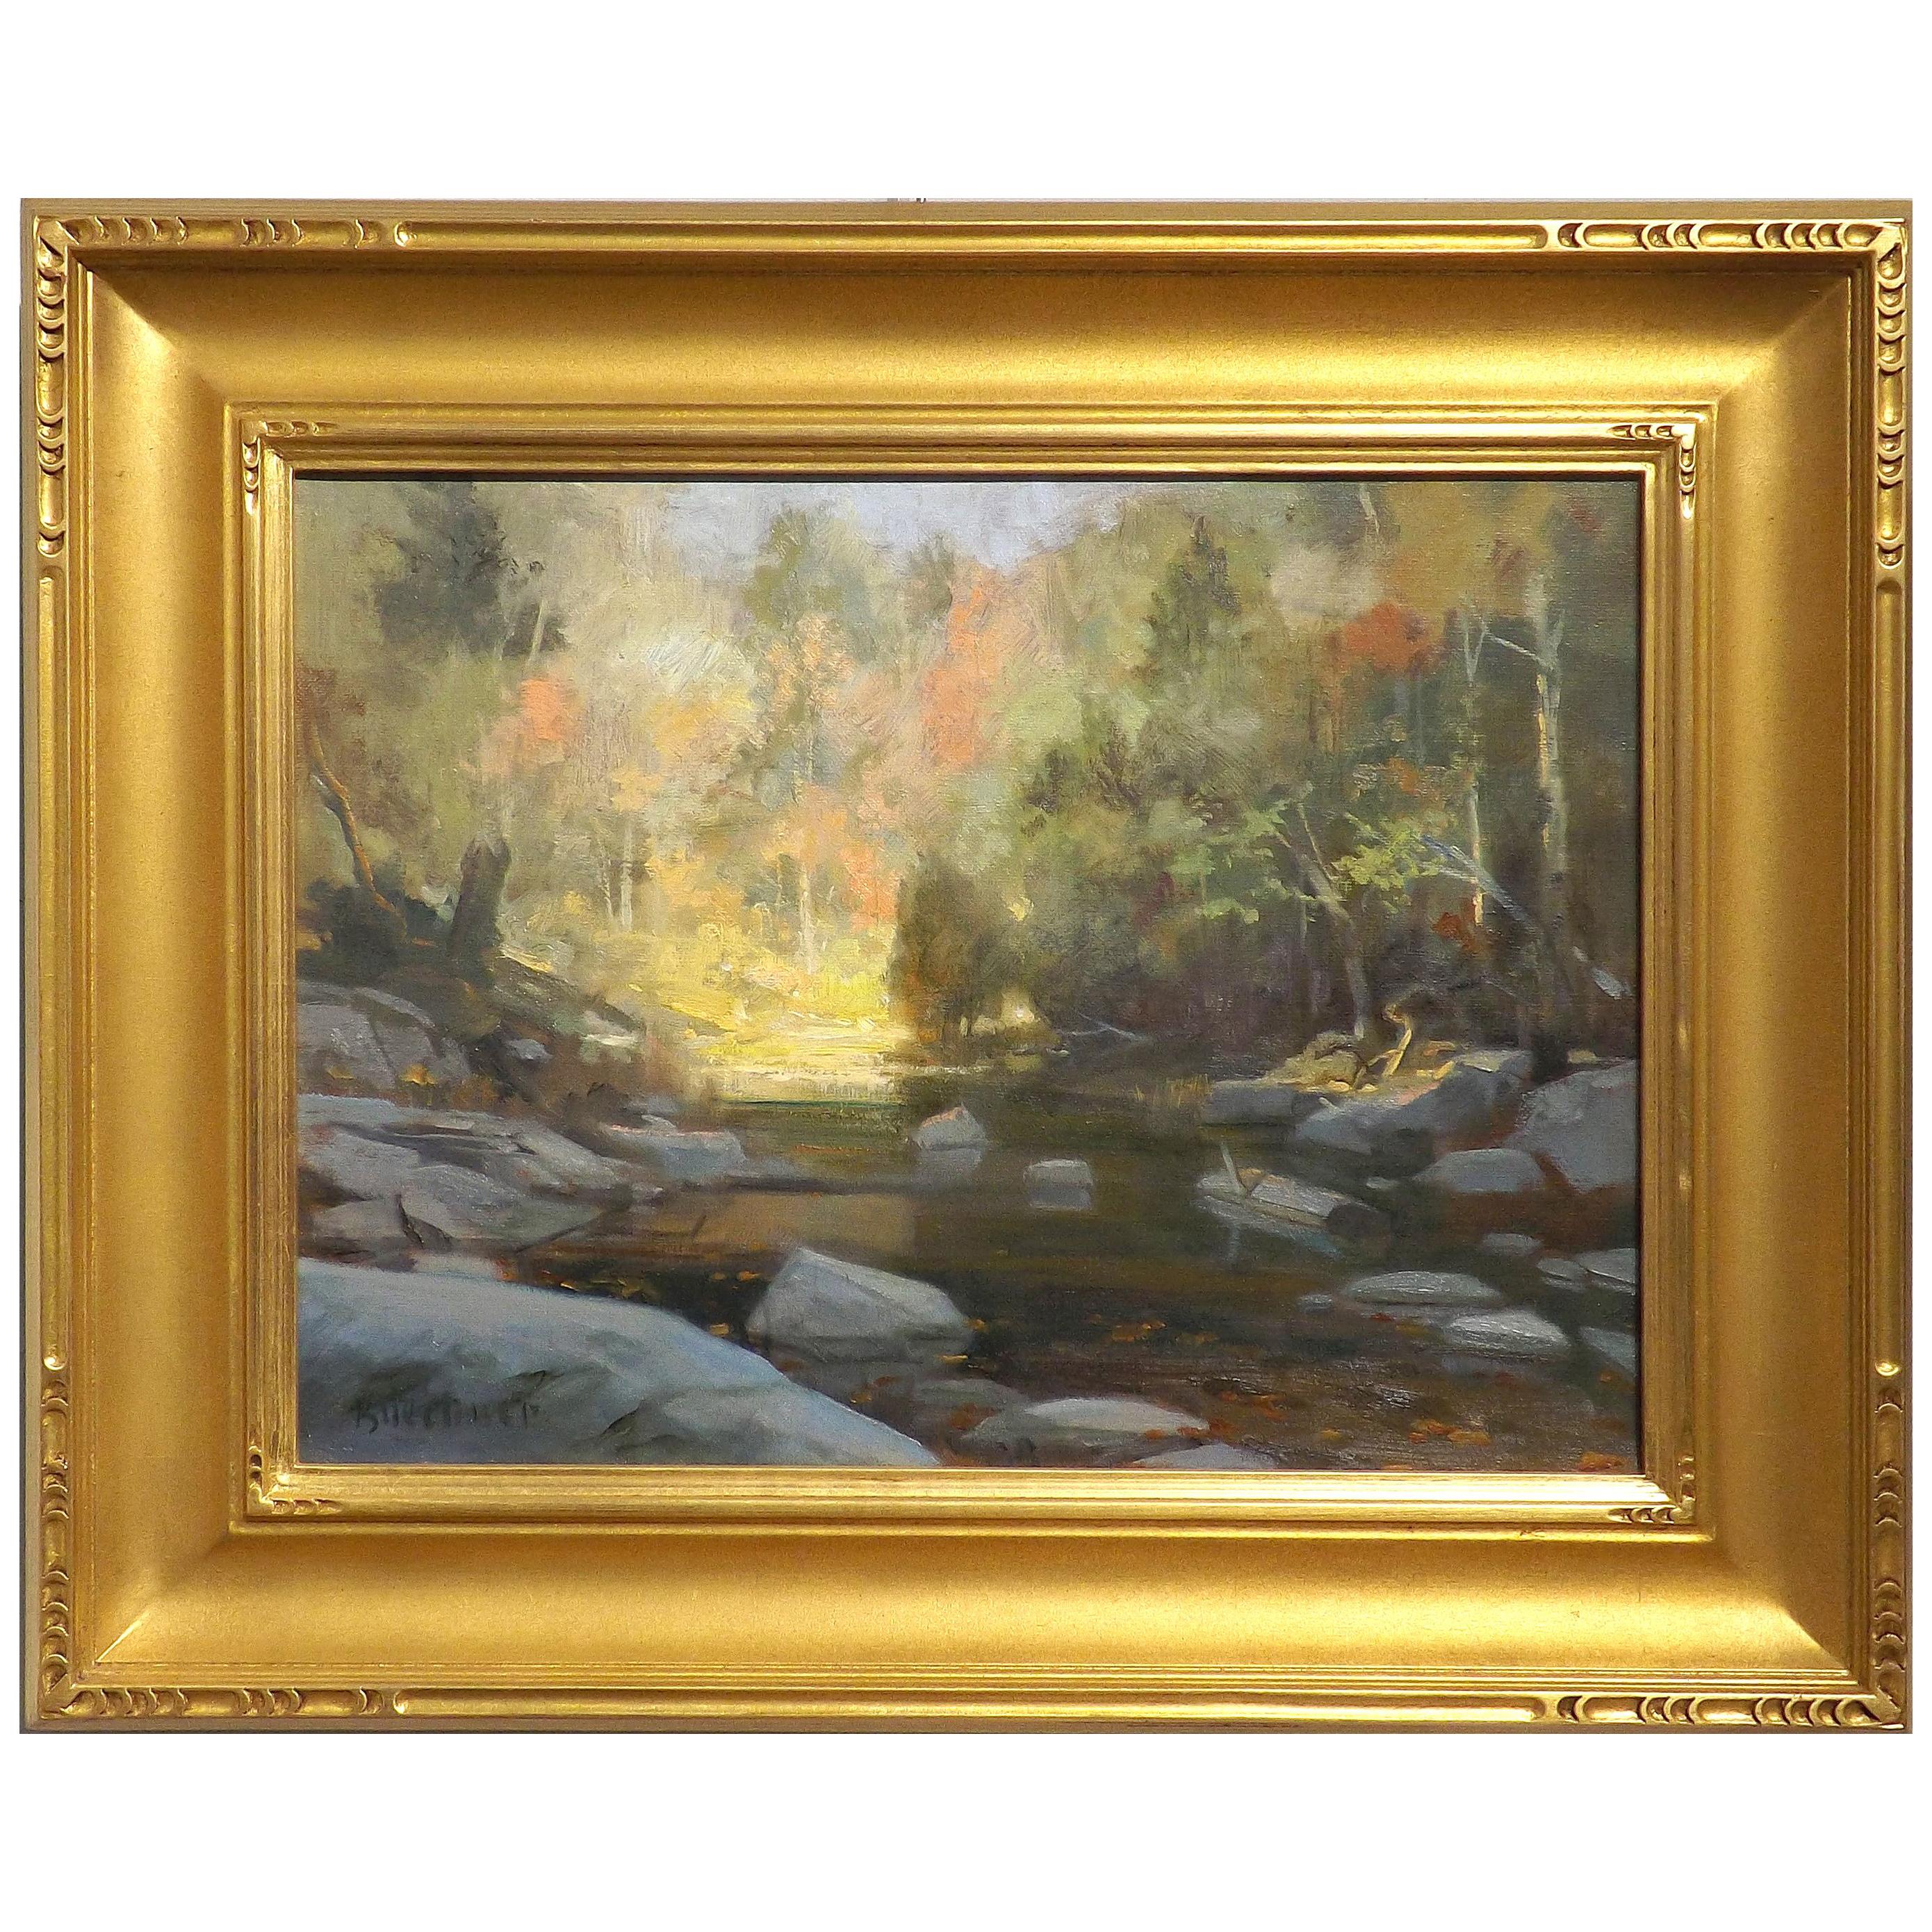 Thomas Buechner Oil Painting on Canvas of a Stream in the Woods